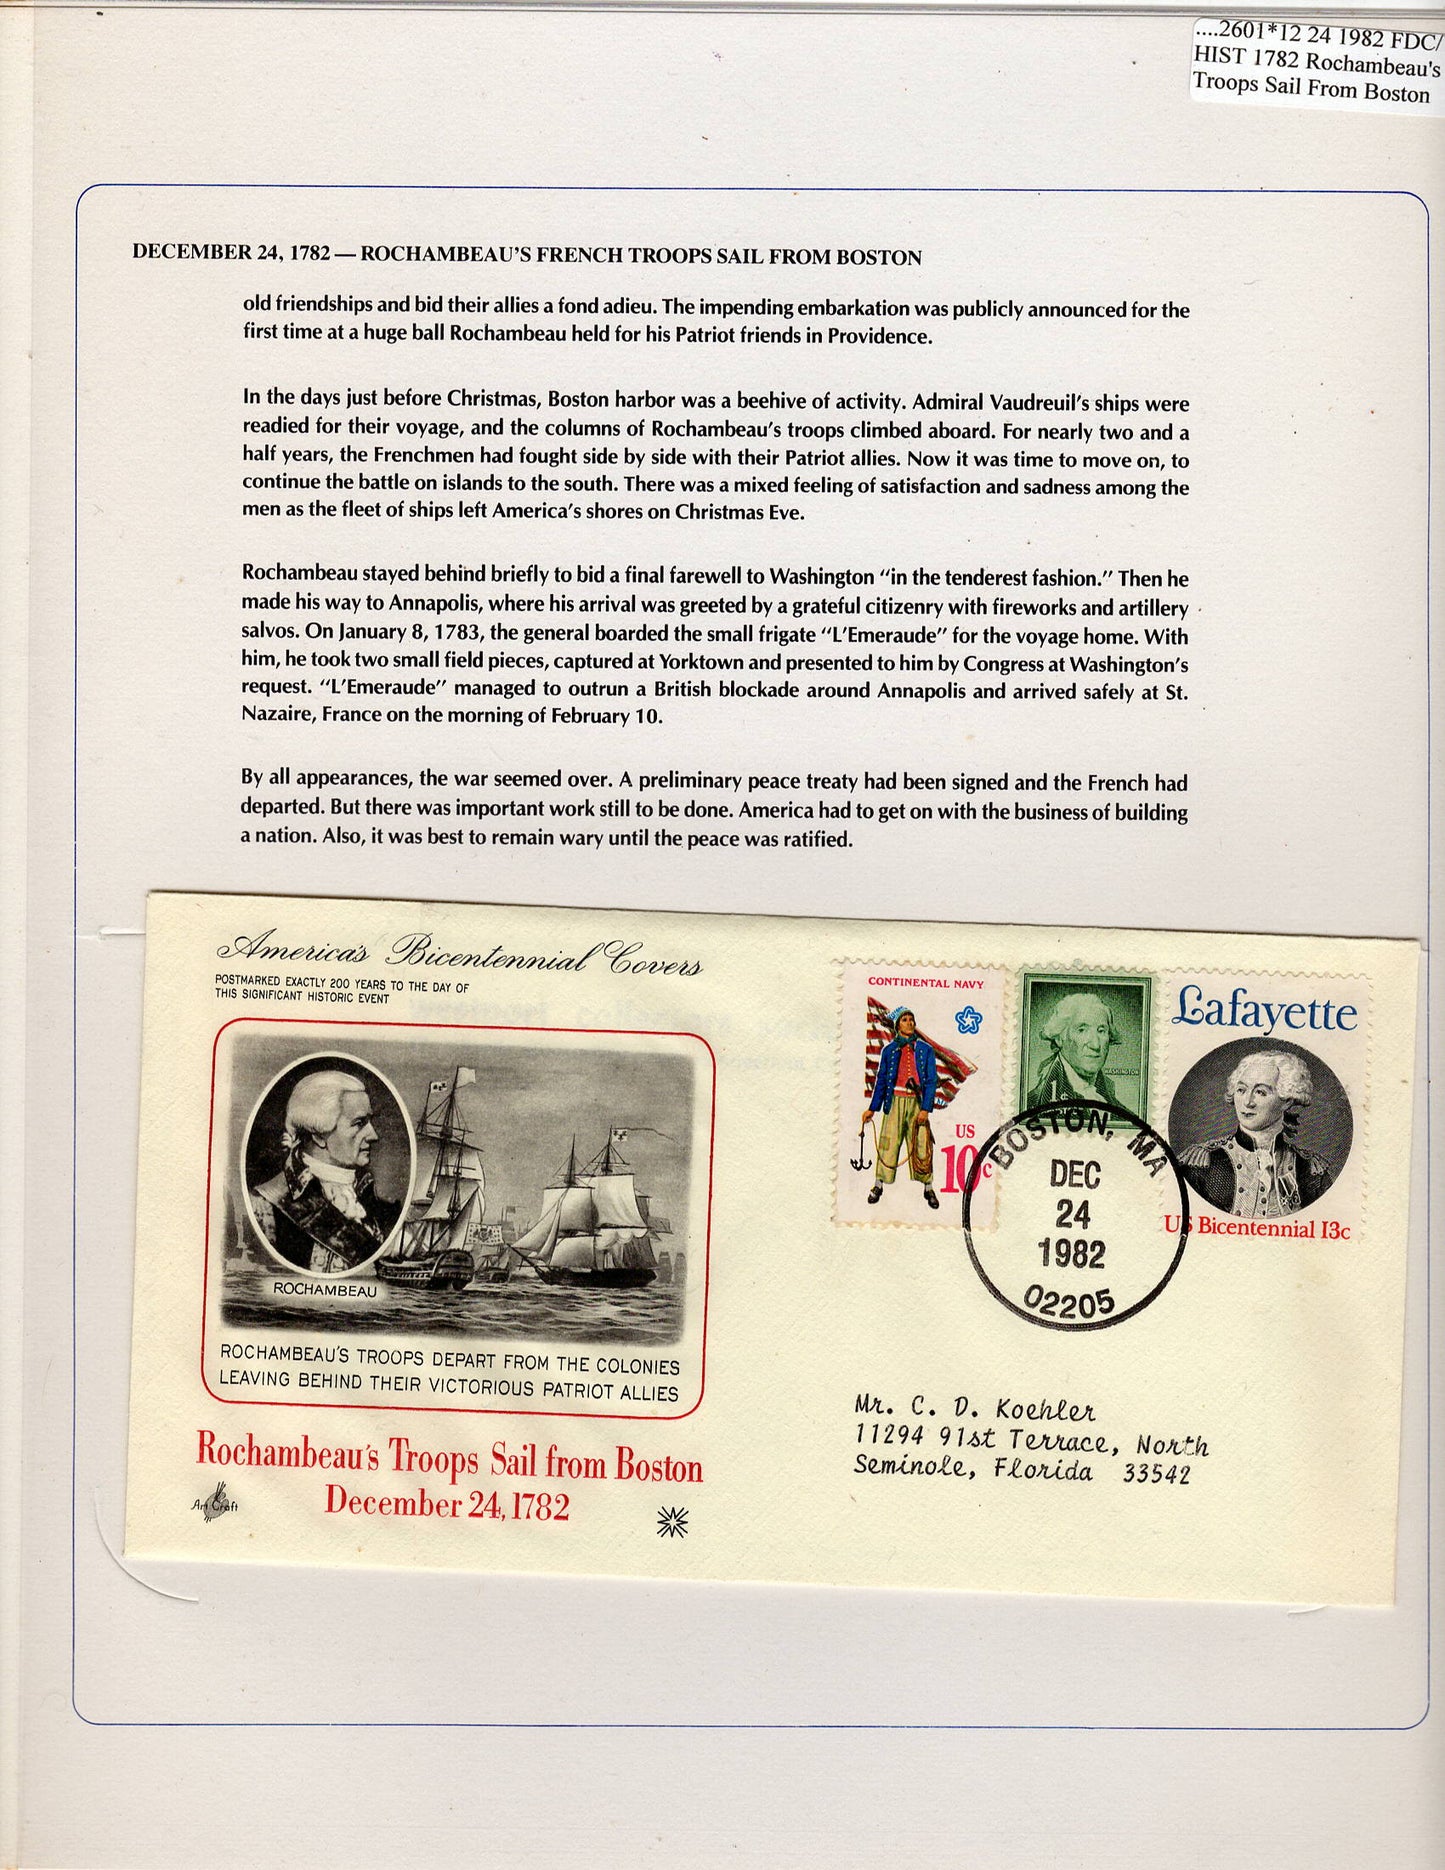 12 24 1982 FDC WH Rochambeau's Troops Sail from Boston 1782